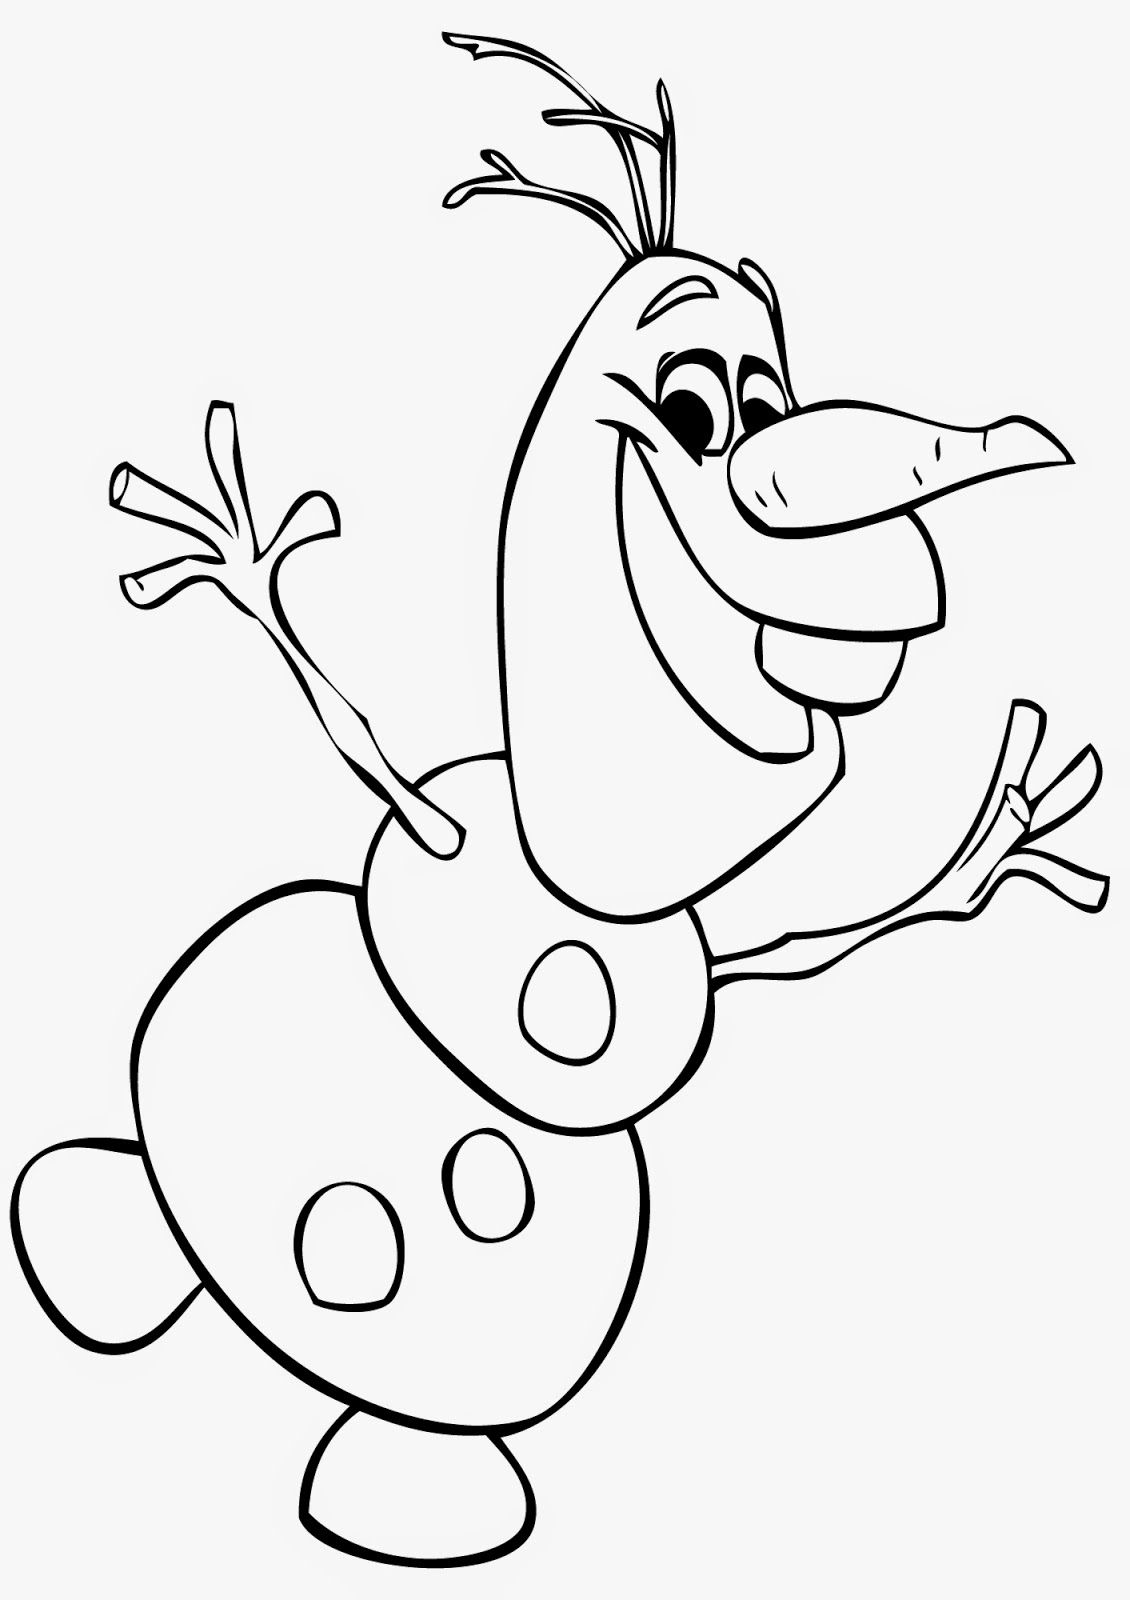 12 Pics of Olaf Beach Coloring Page - Frozen Olaf Summer Coloring ...